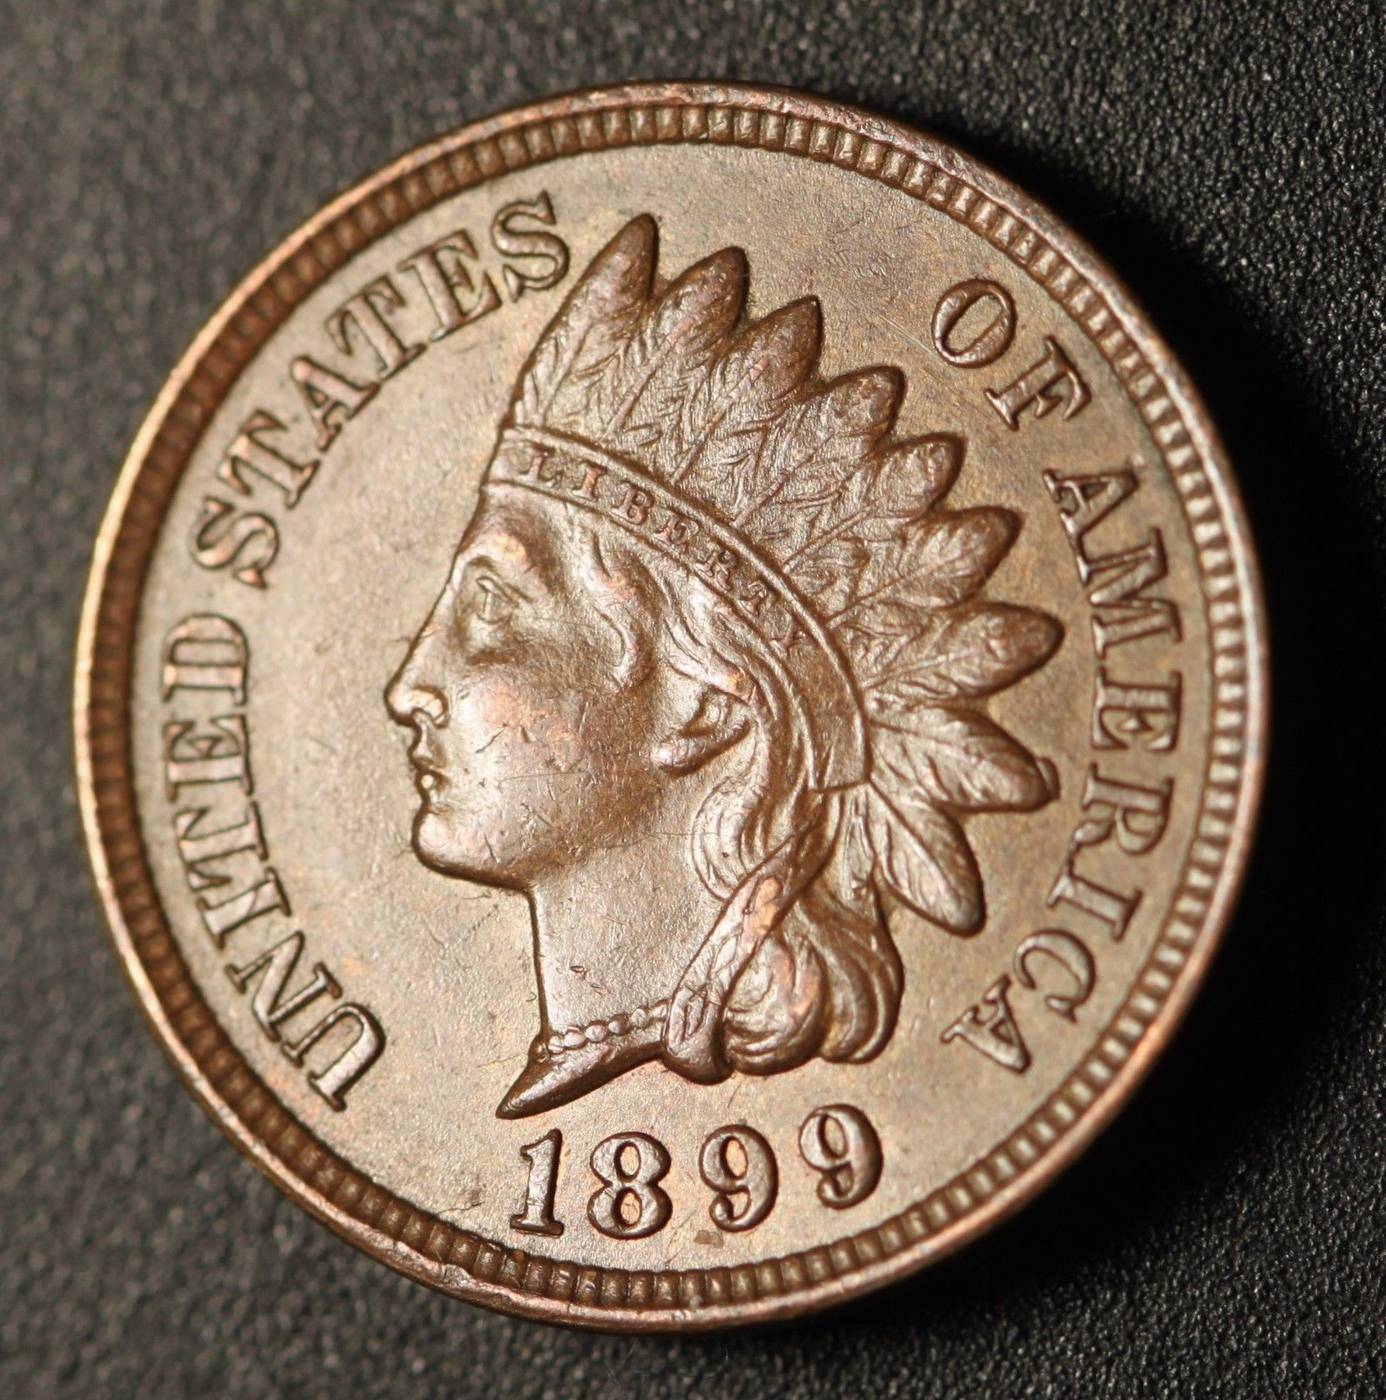 1899 RPD-035 - Indian Head Penny - Photo by Ed Nathanson